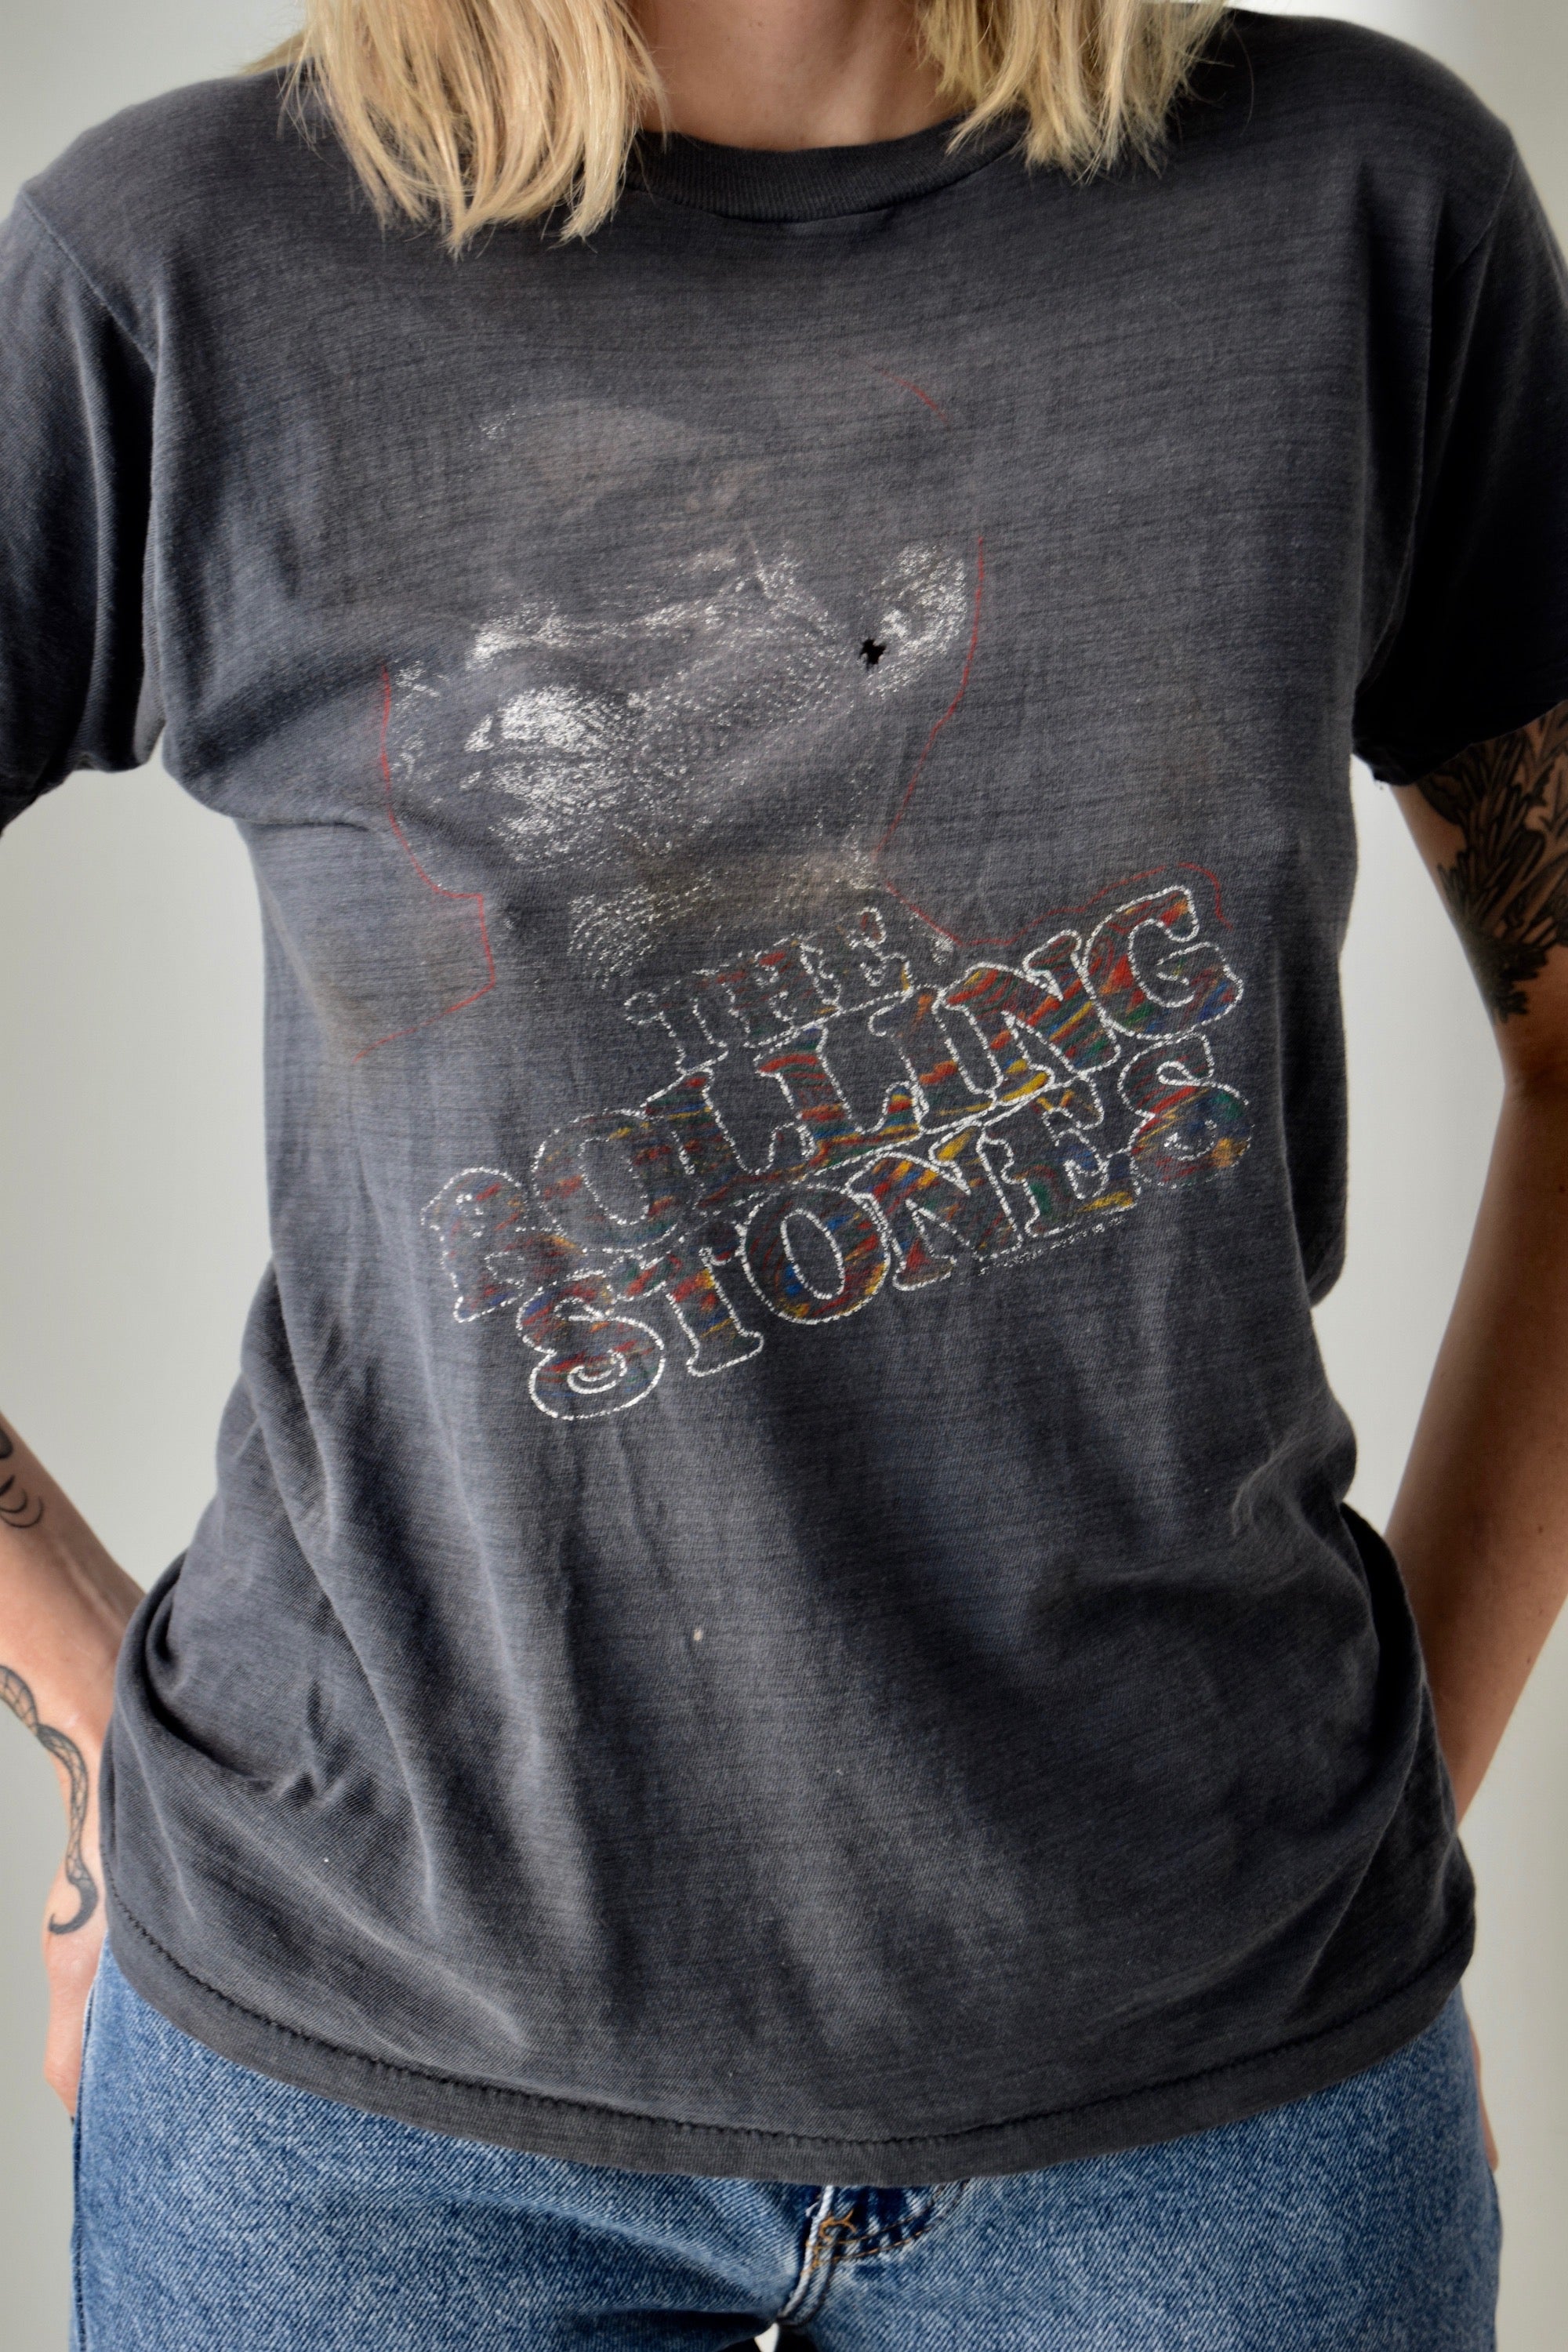 The Rolling Stones "Tattoo You" Vintage T-Shirt